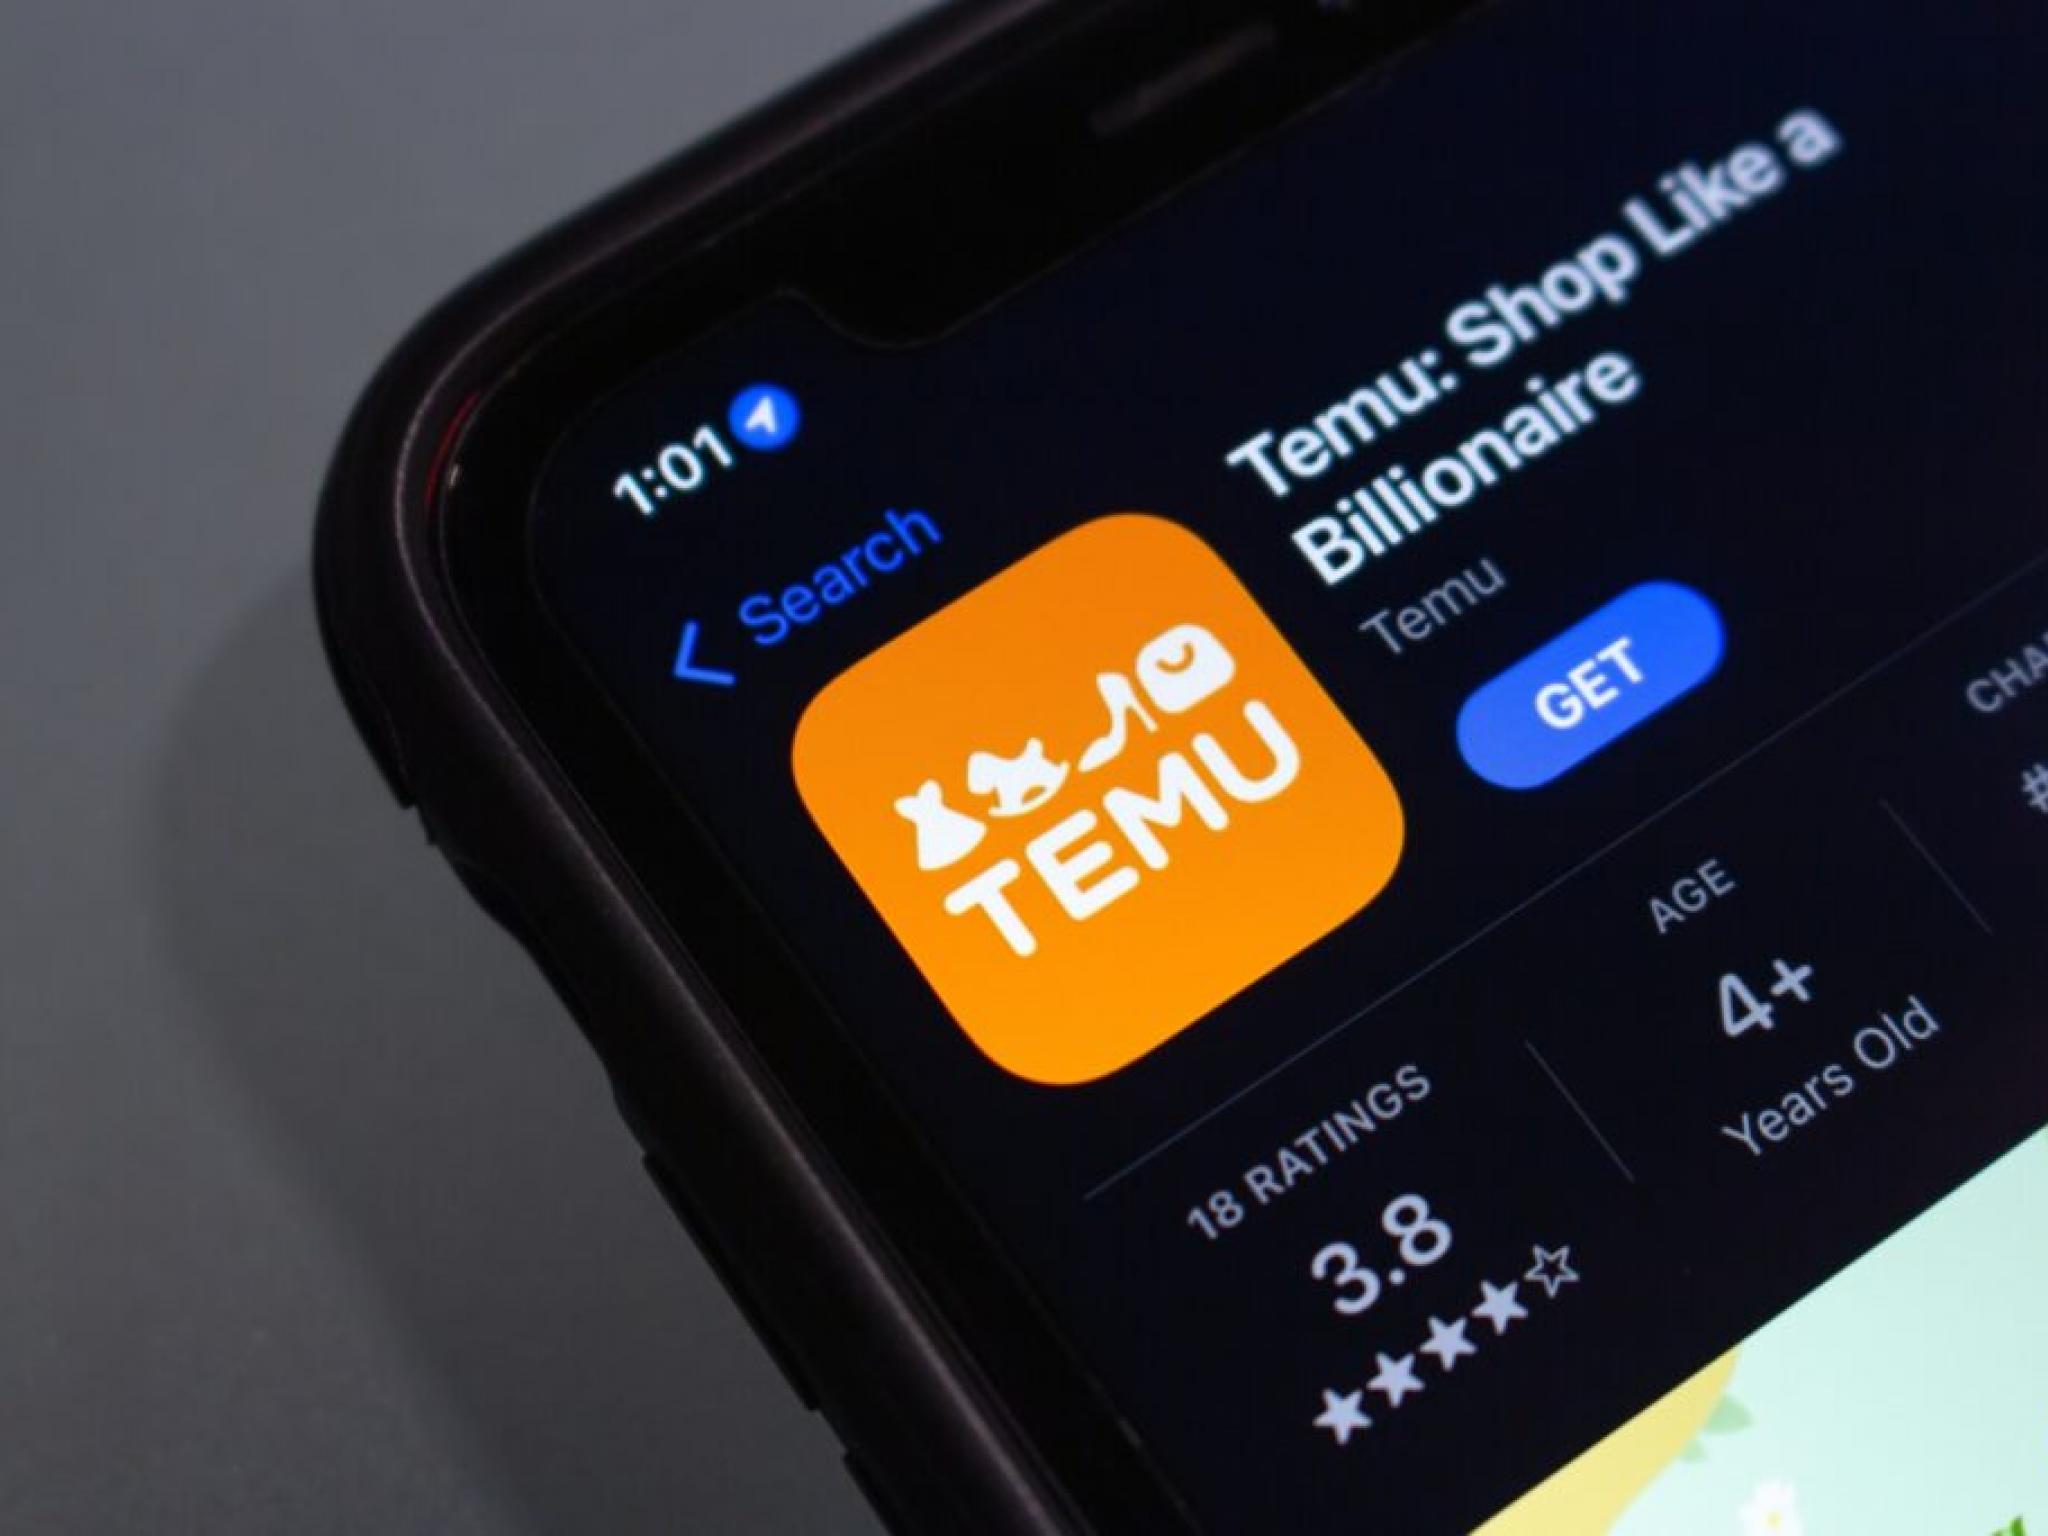  temus-growth-surge-makes-parent-pdd-surpass-alibaba-as-chinas-most-valuable-e-commerce-giant 